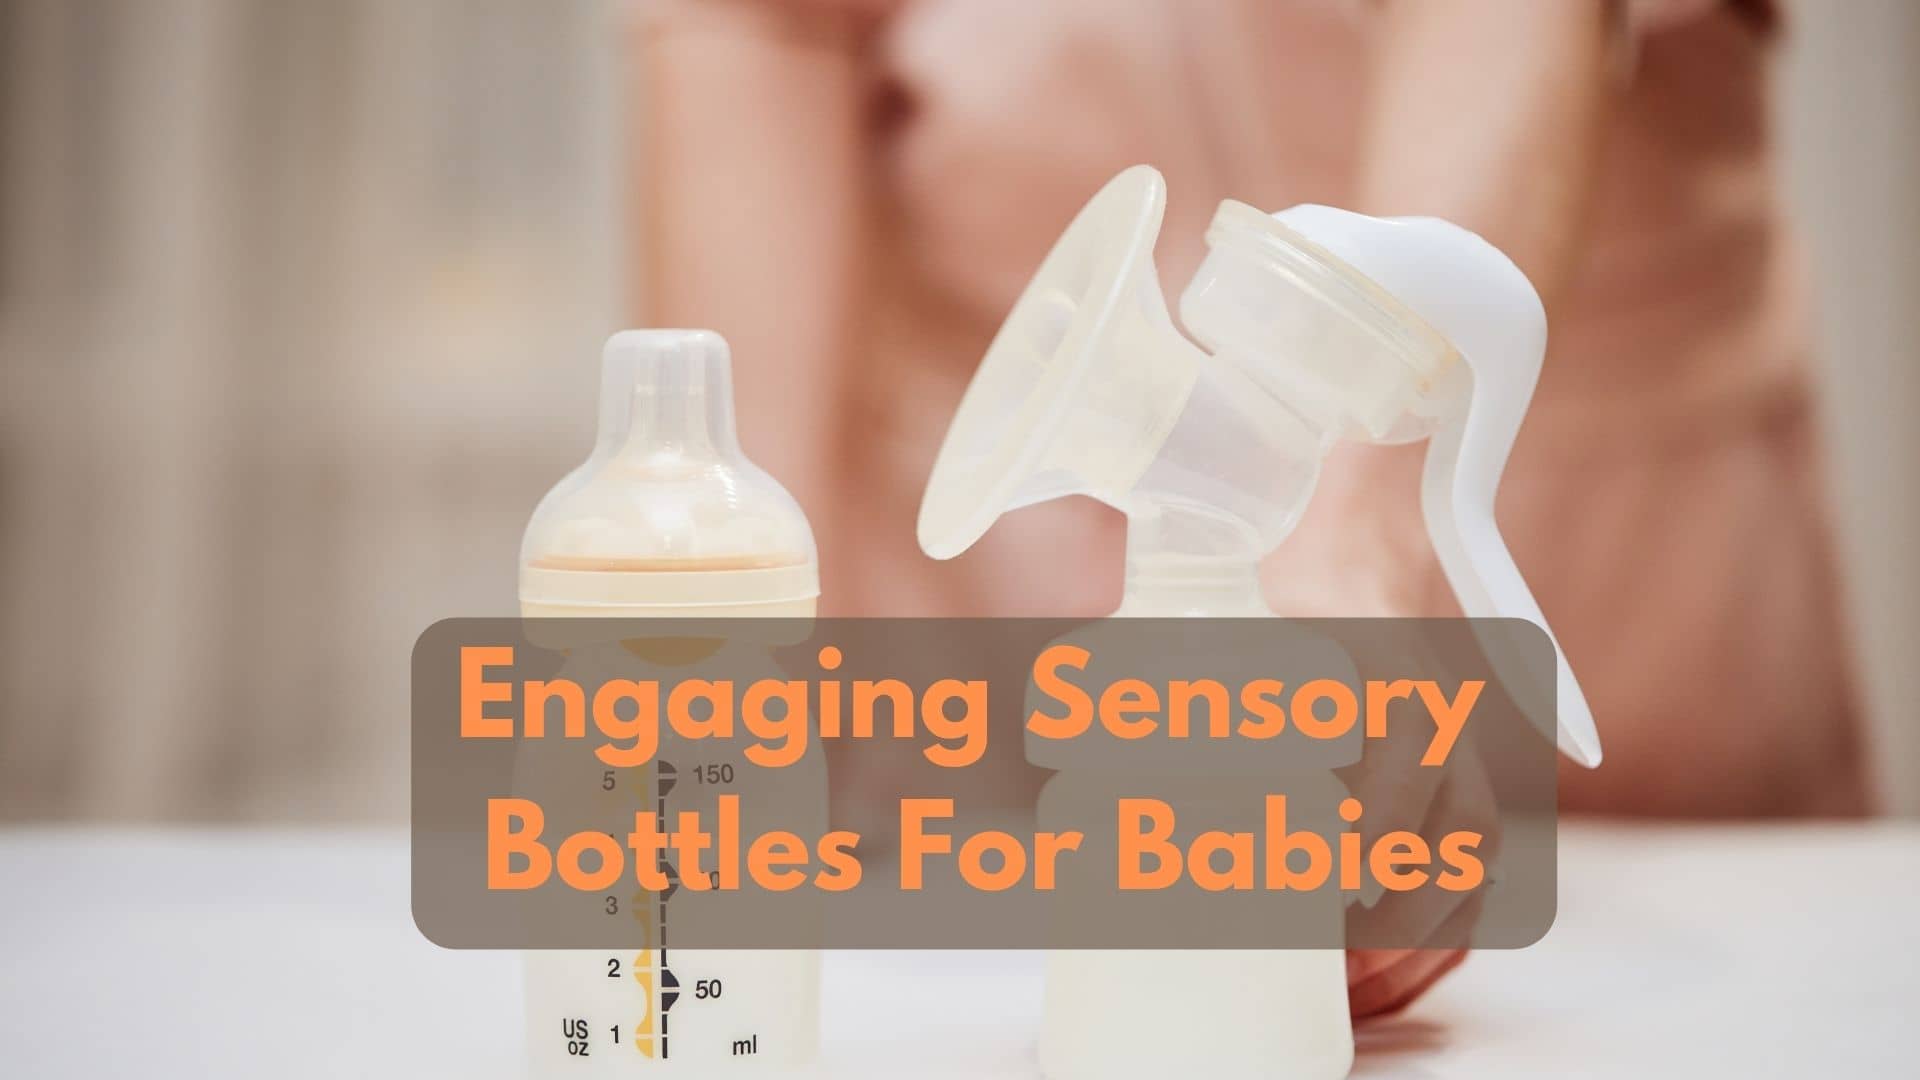 What Are Some Engaging Sensory Bottles For Babies?